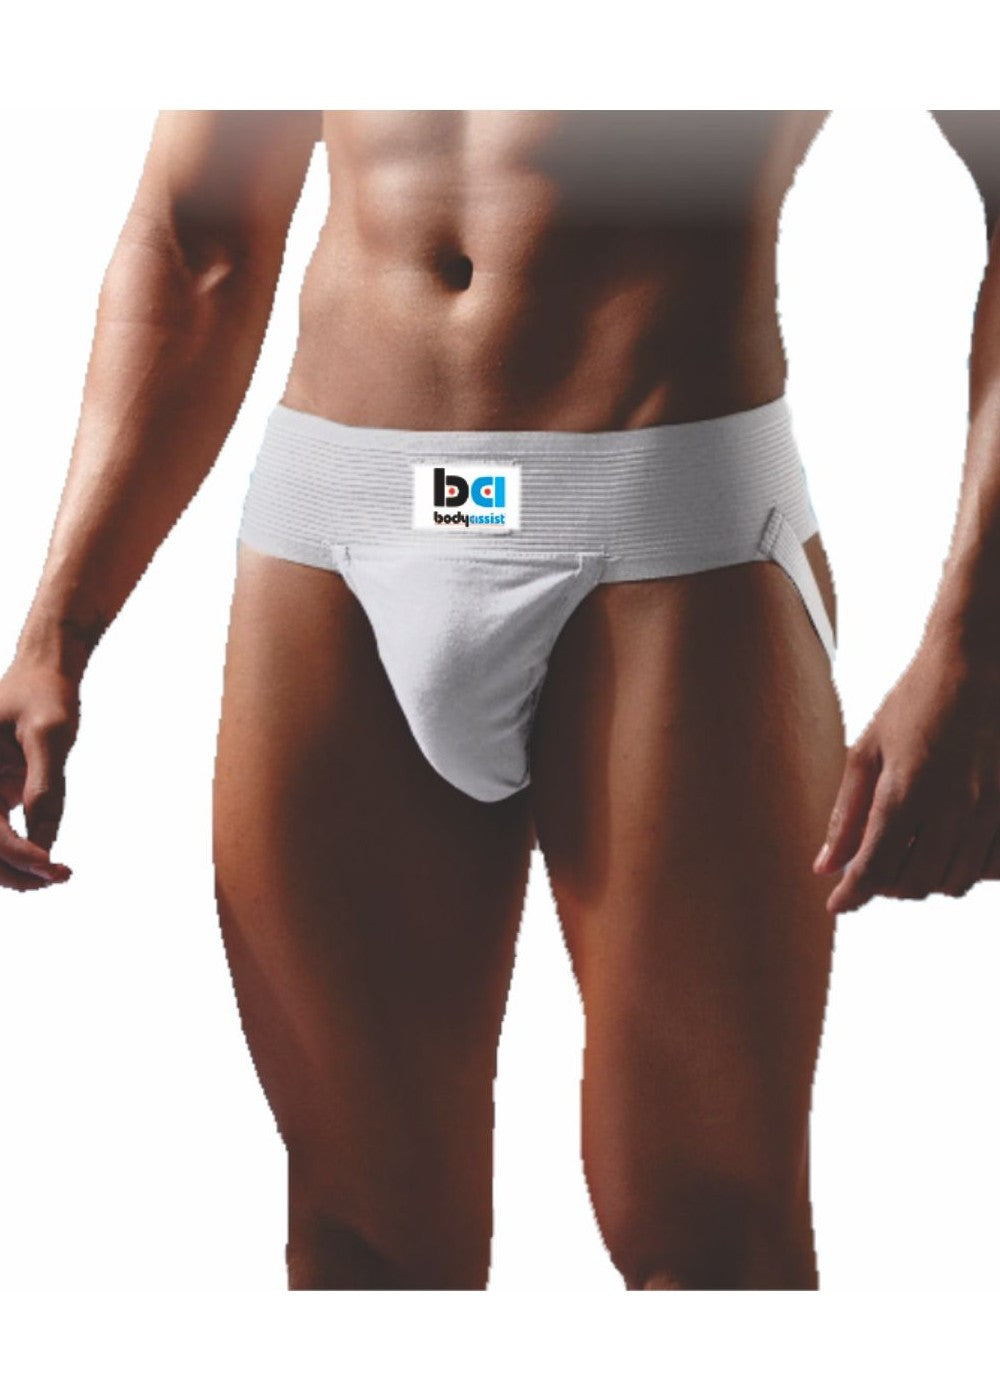 Body Assist Jockstrap White, Athletic Supporter 540 (Free Shipping